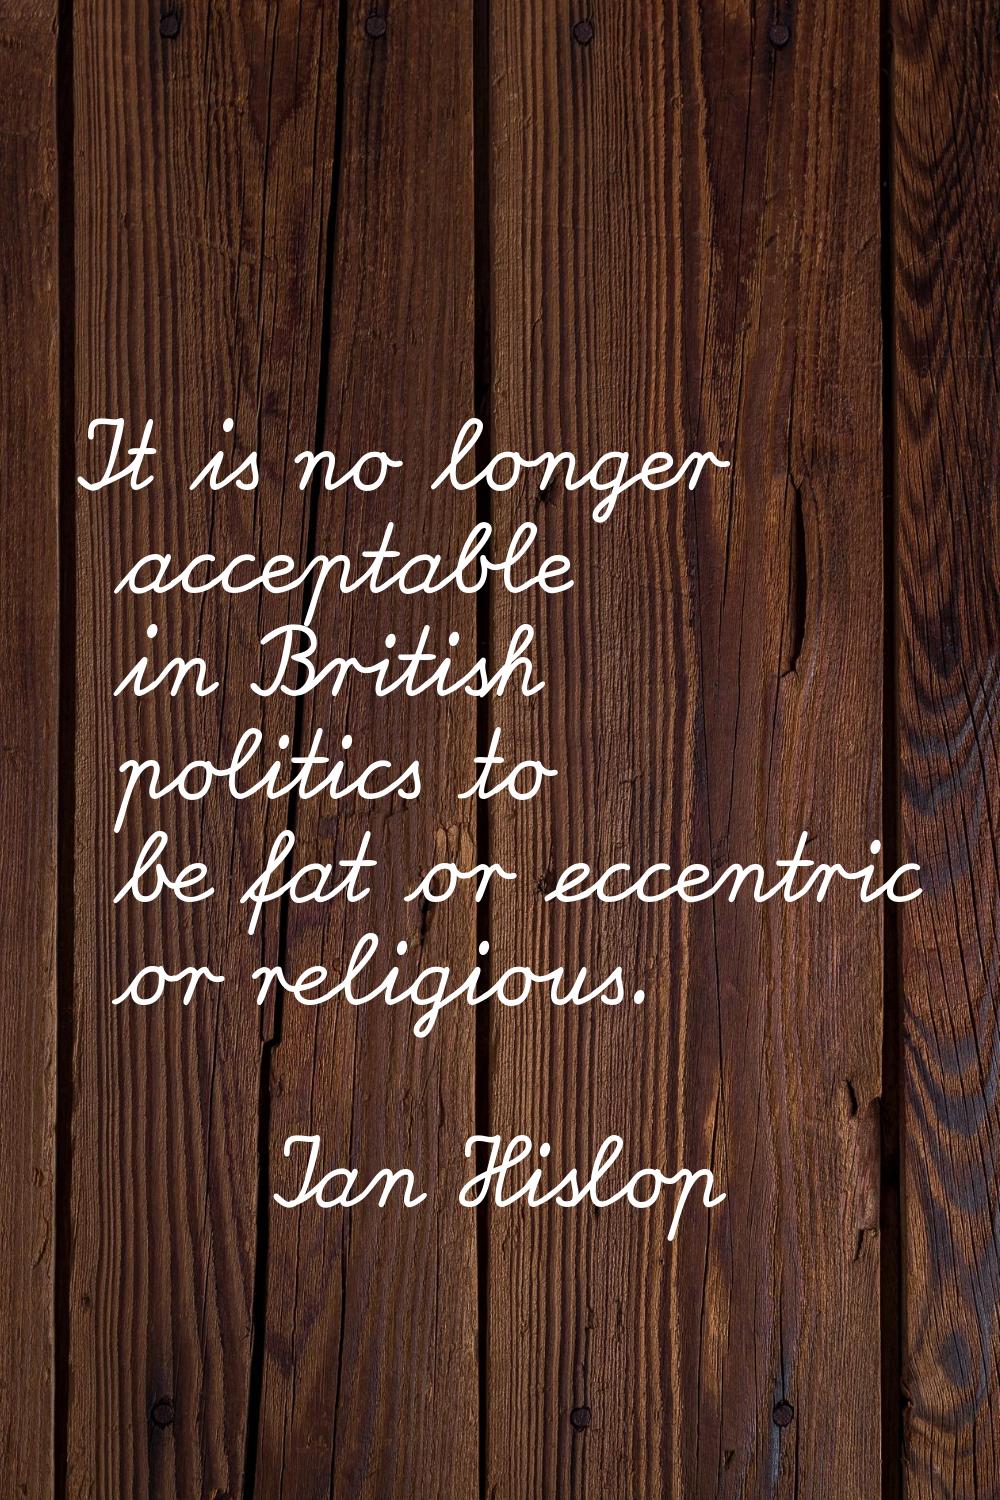 It is no longer acceptable in British politics to be fat or eccentric or religious.